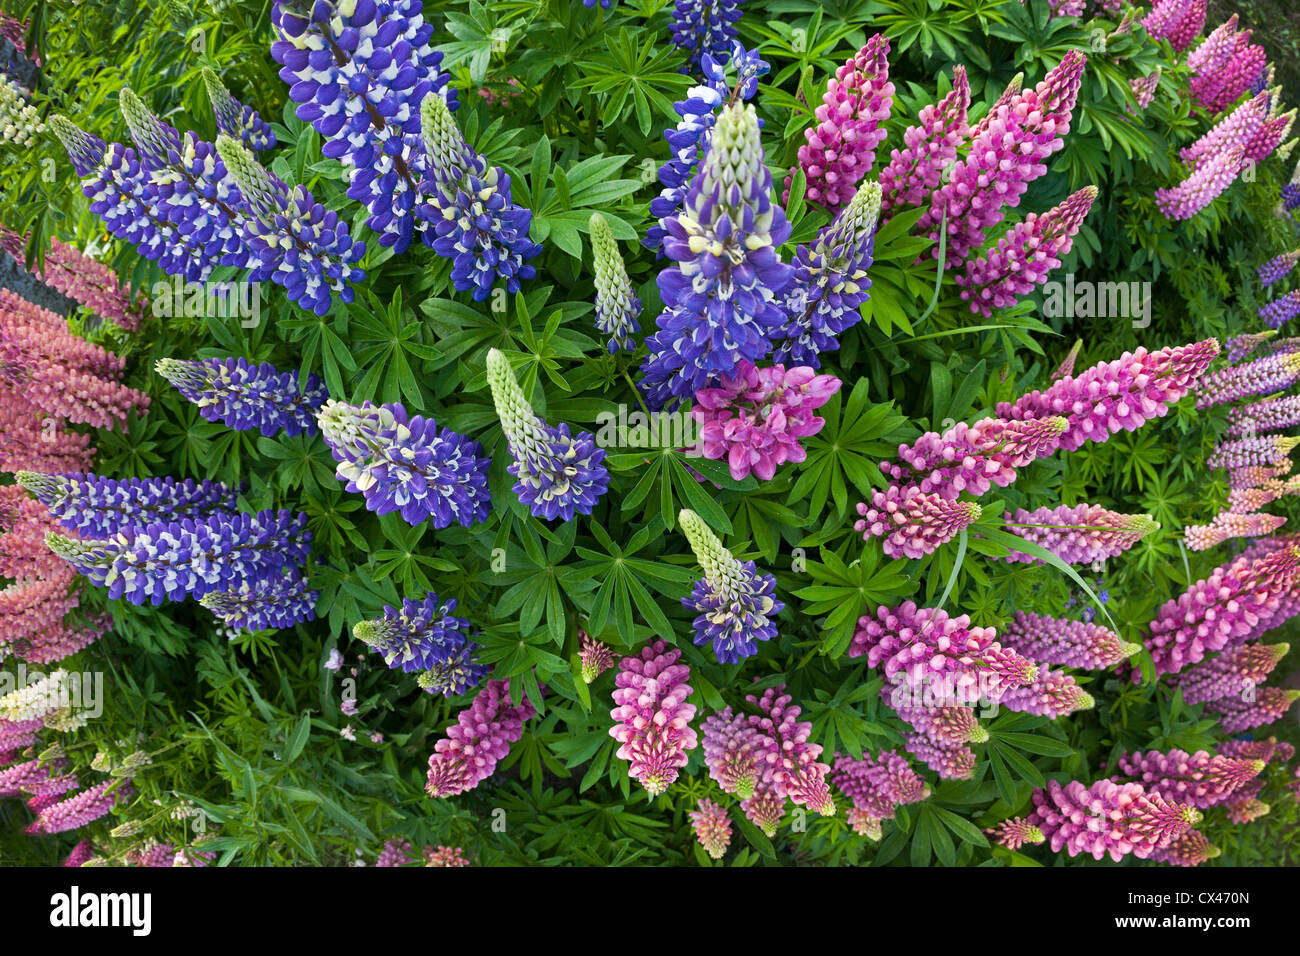 A clump of large-leaved Lupines in bloom (Lupinus polyphyllus)   Massif de Lupins (Lupinus polyphyllus) en fleurs. Stock Photo